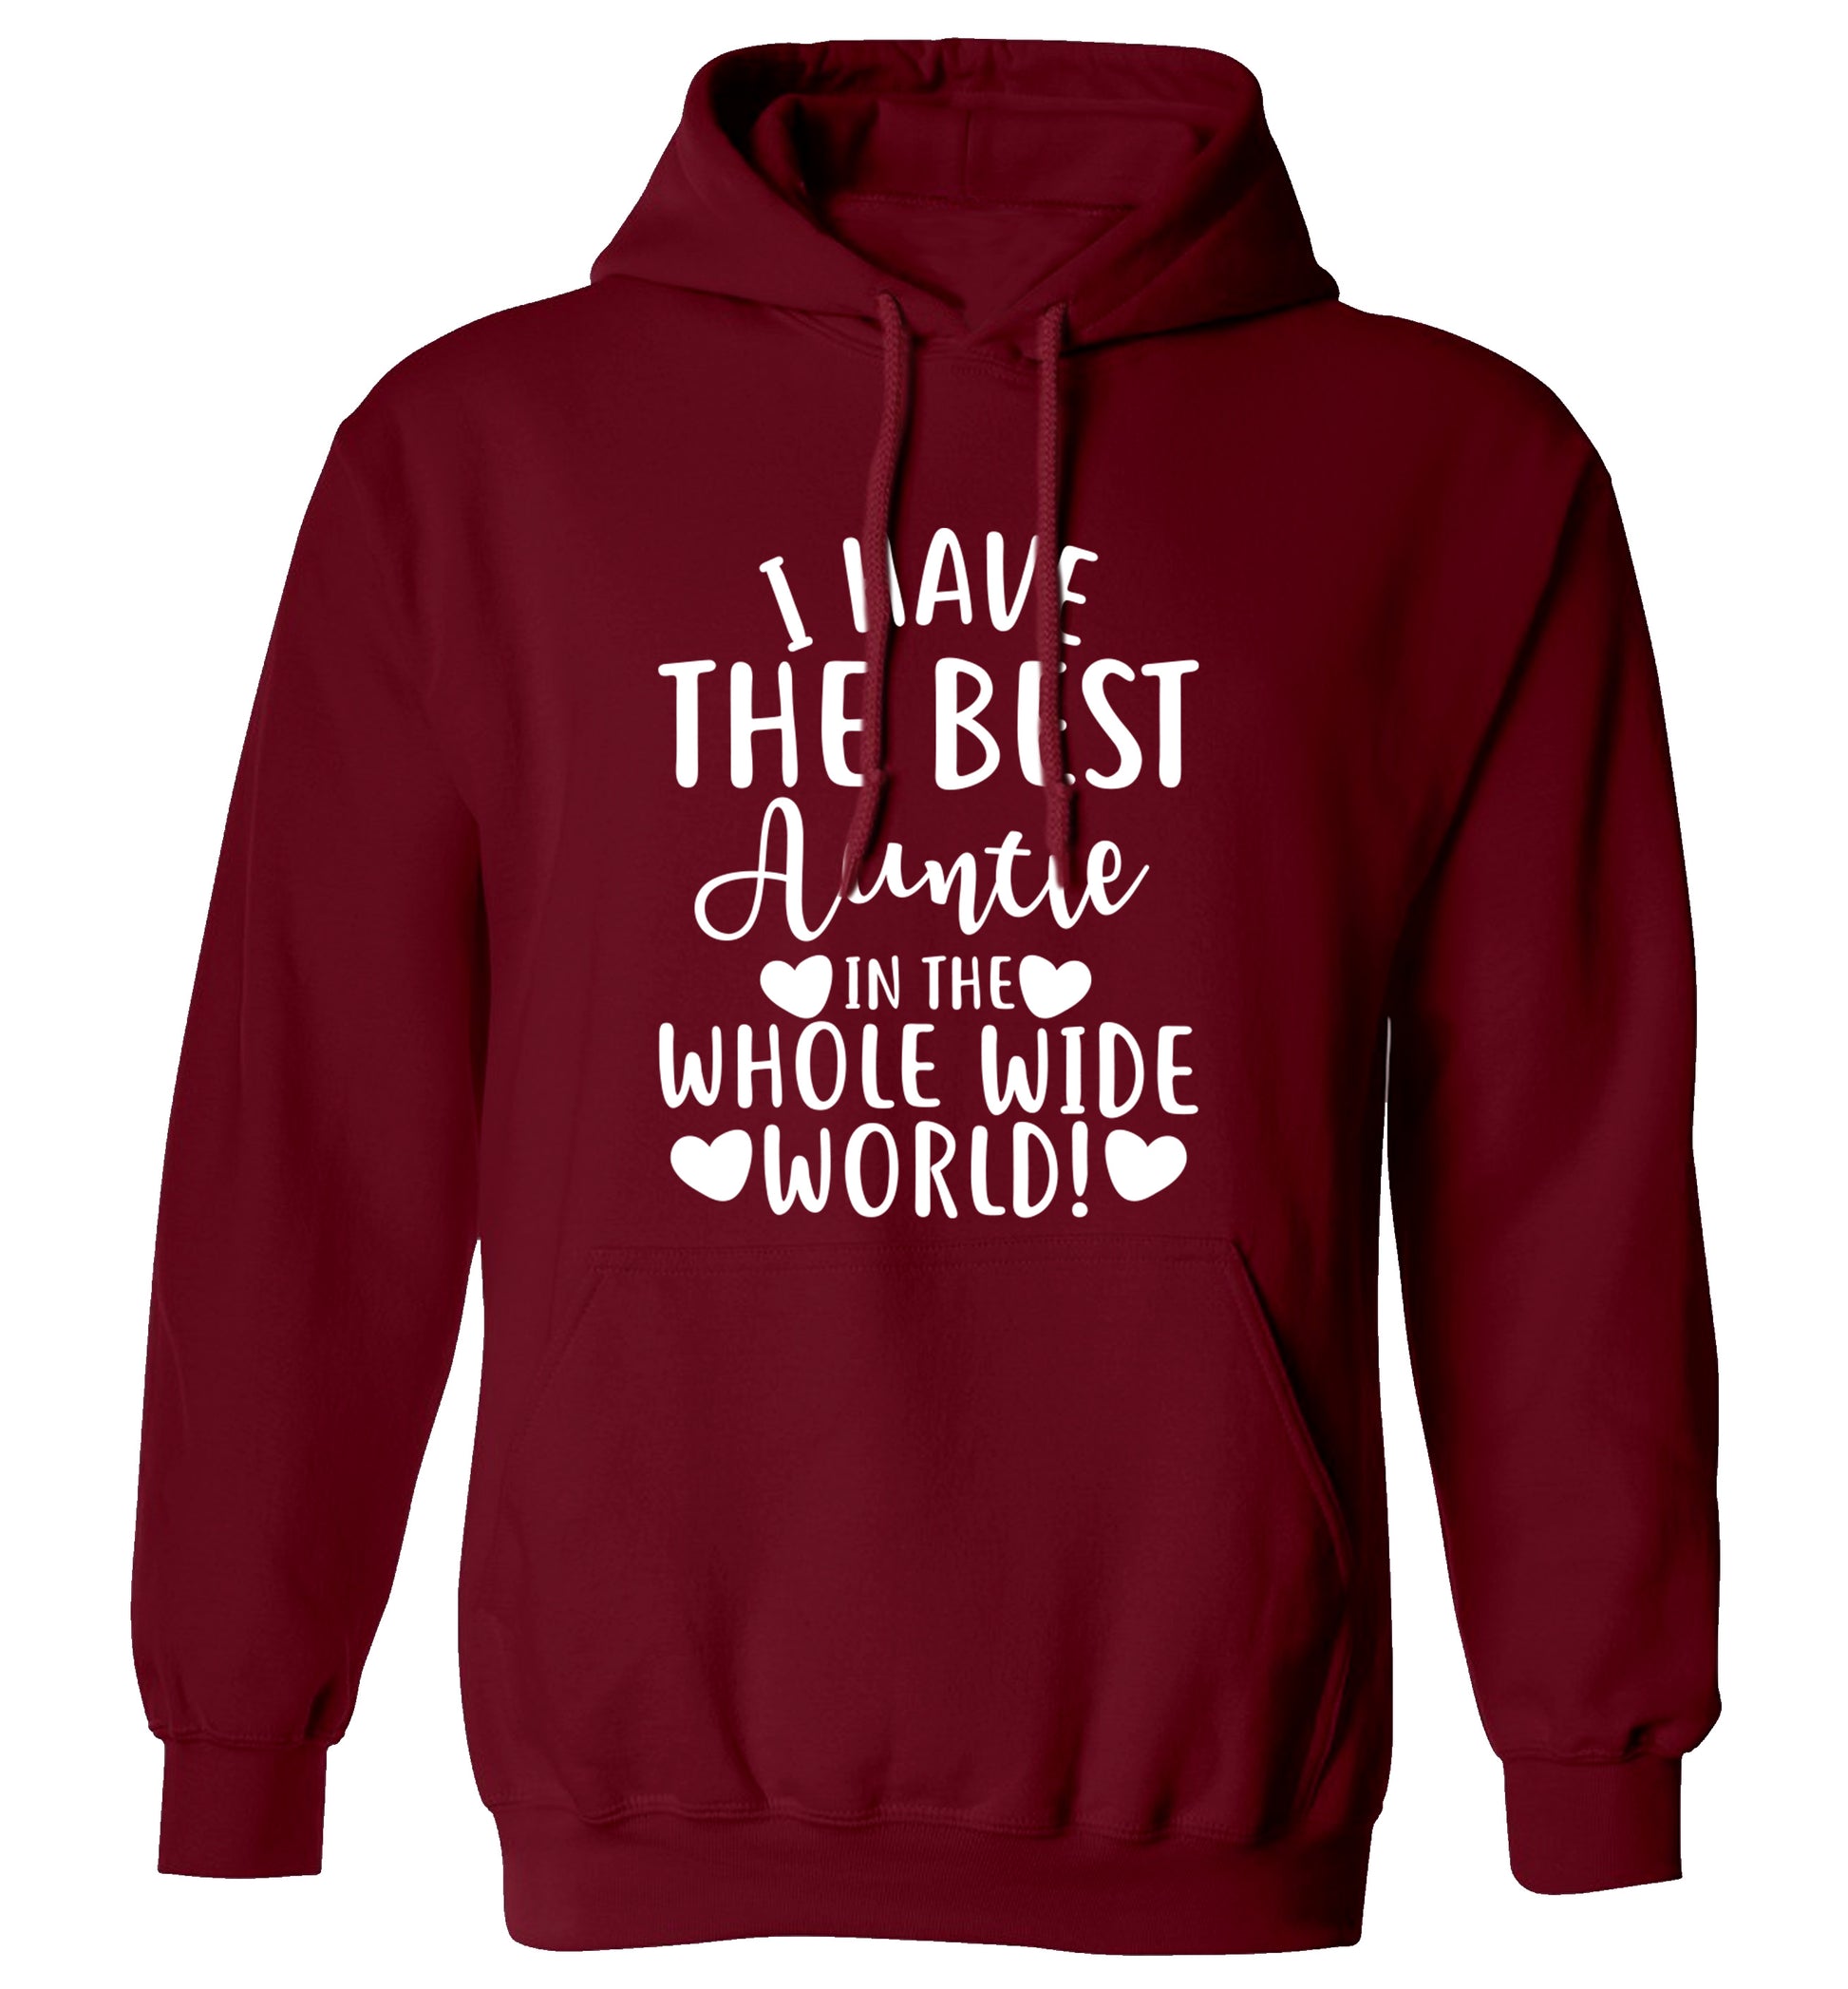 I have the best auntie in the whole wide world! adults unisex maroon hoodie 2XL